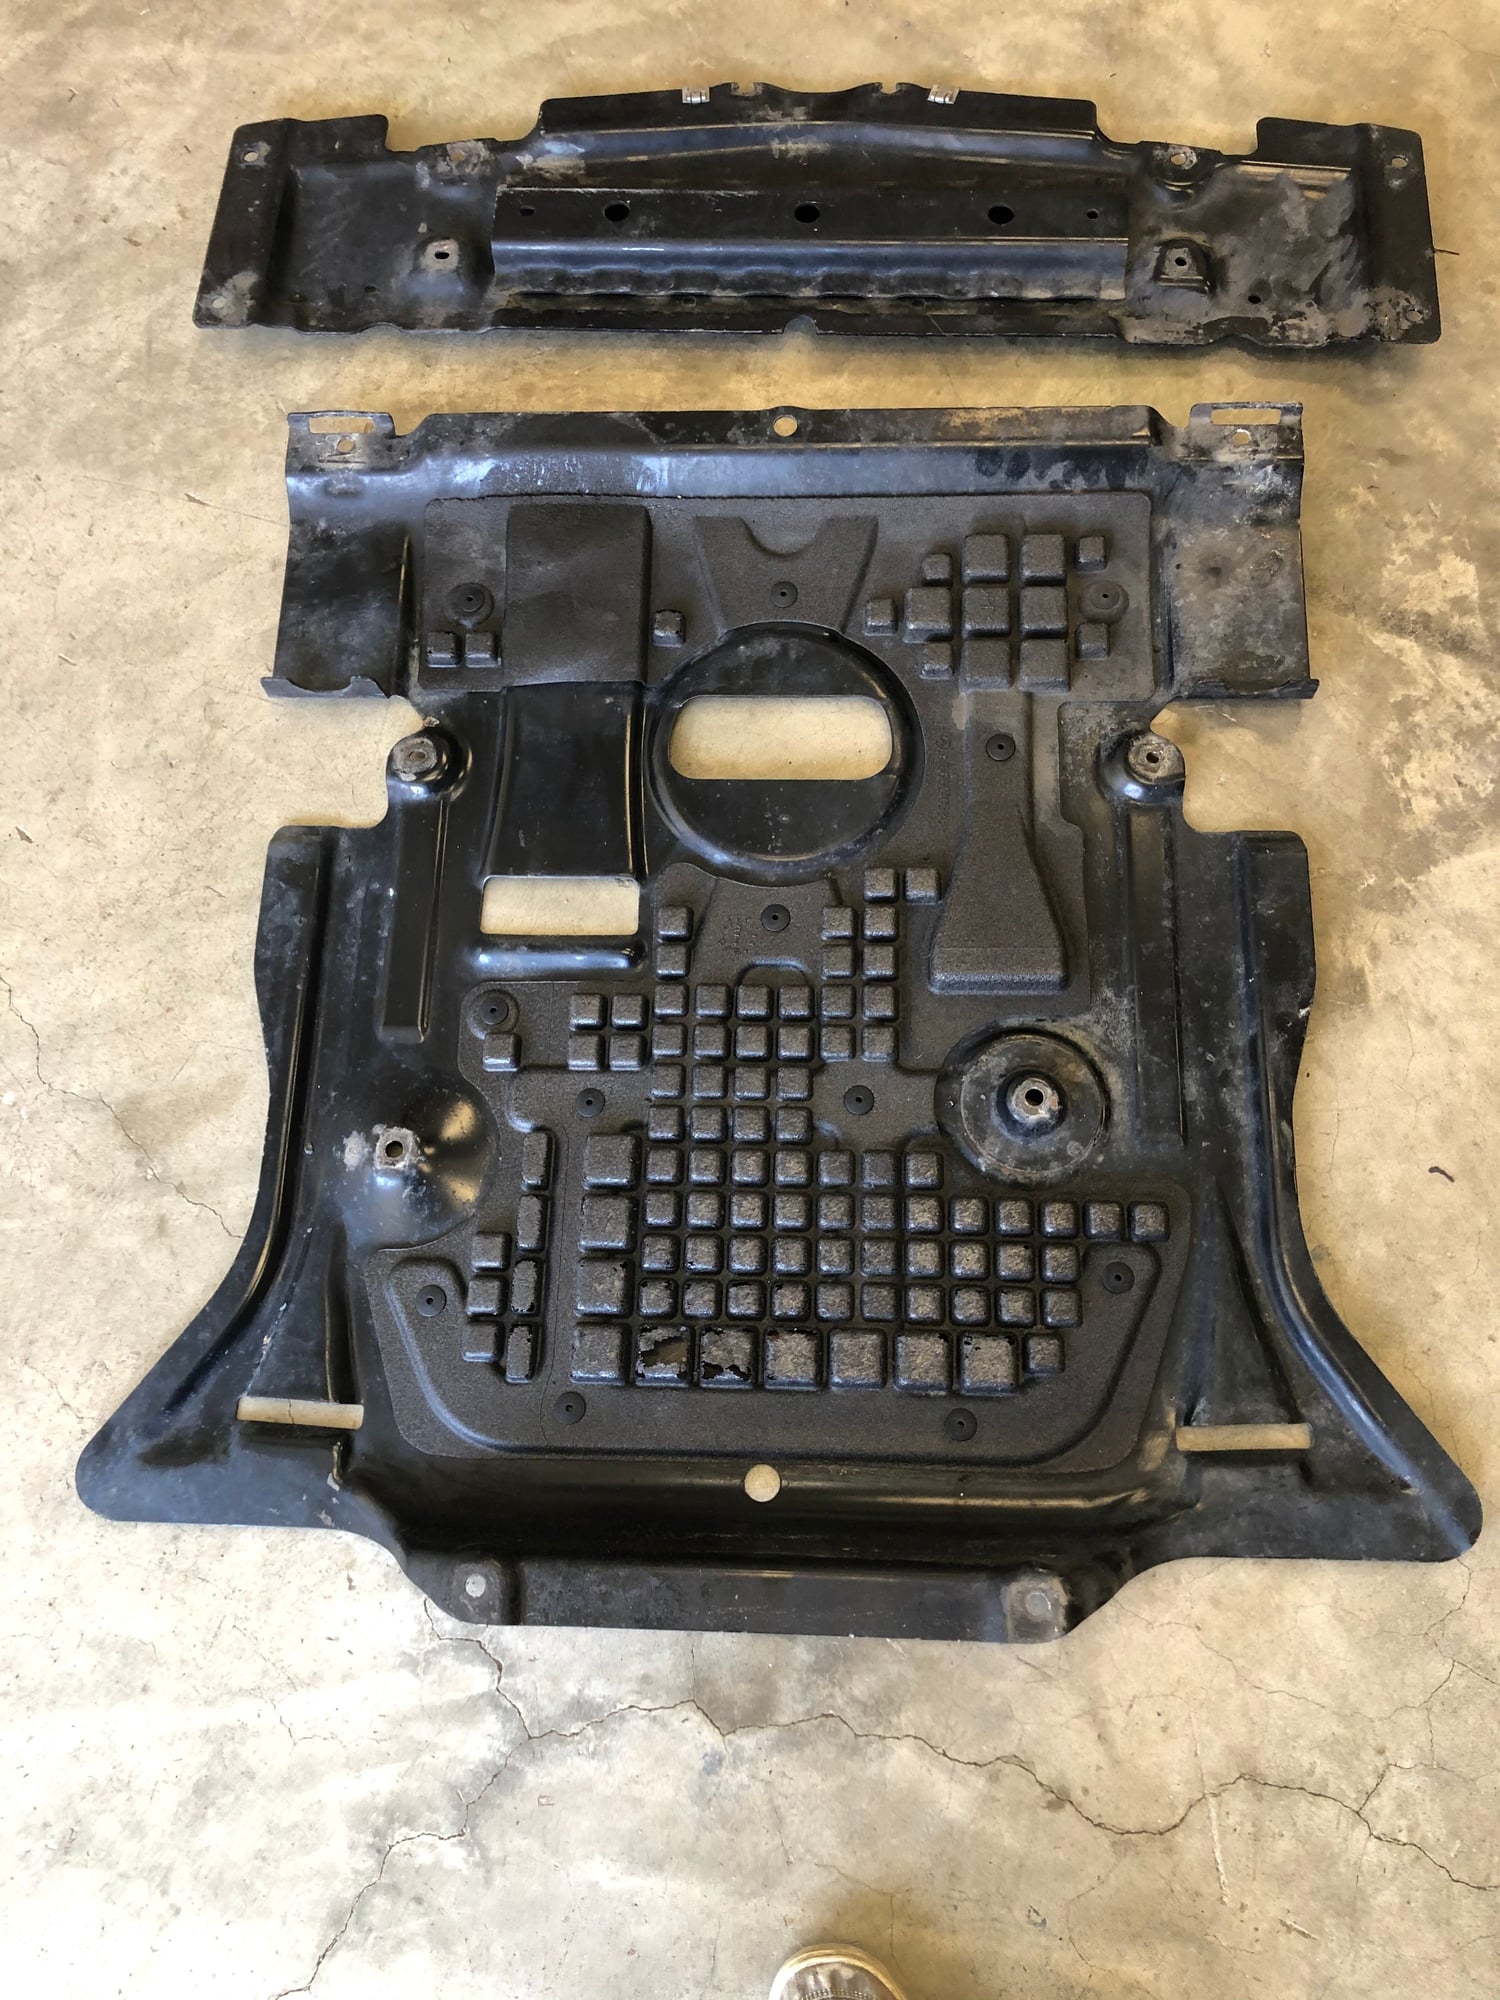 Exterior Body Parts - W or X 166 Off Road package steel skid plates - Used - 2013 to 2019 Mercedes-Benz GL550 - 2012 to 2018 Mercedes-Benz GLE-Class - 2013 to 2019 Mercedes-Benz GL450 - Sykesville, MD 21784, United States